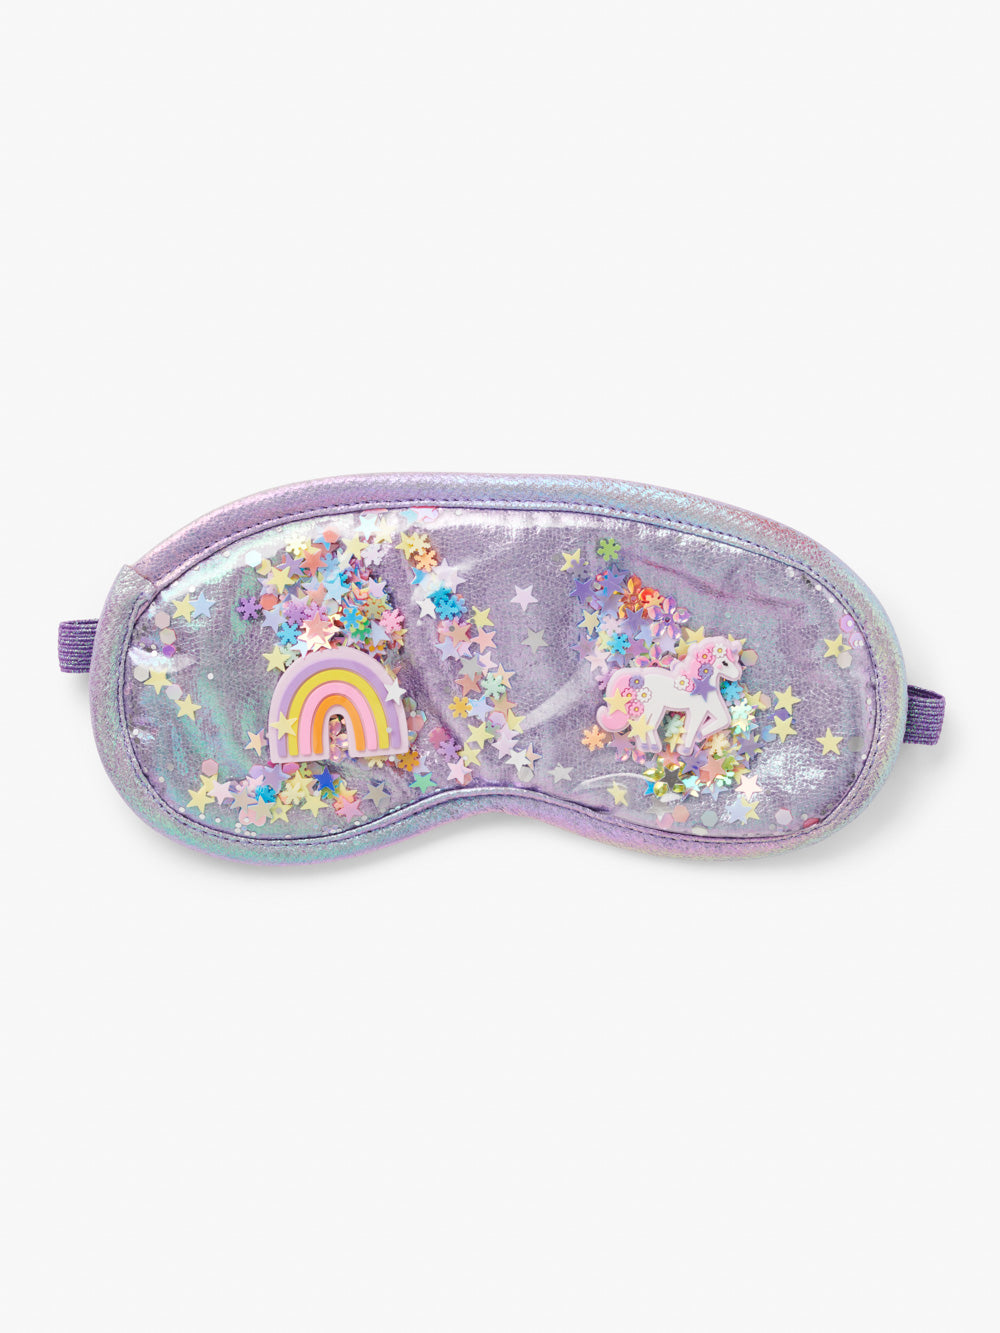 Small Stuff Accessories - Shimmery lilac shaker eye mask